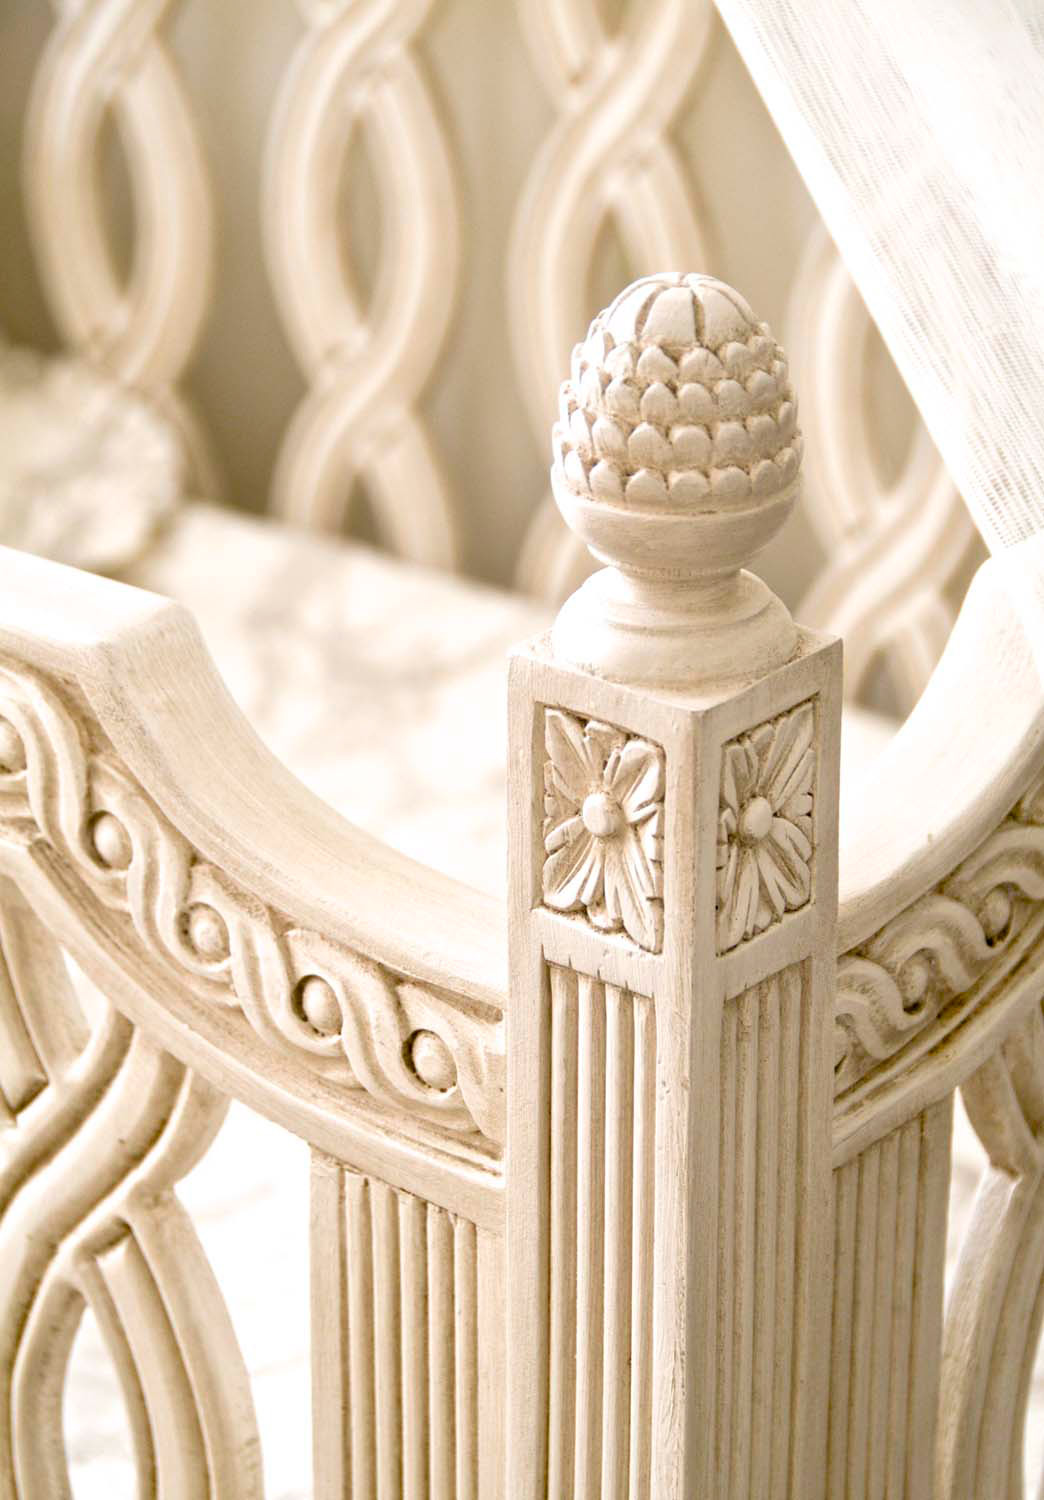 9 Antique white painted finish on furniture carving ideal for all furniture